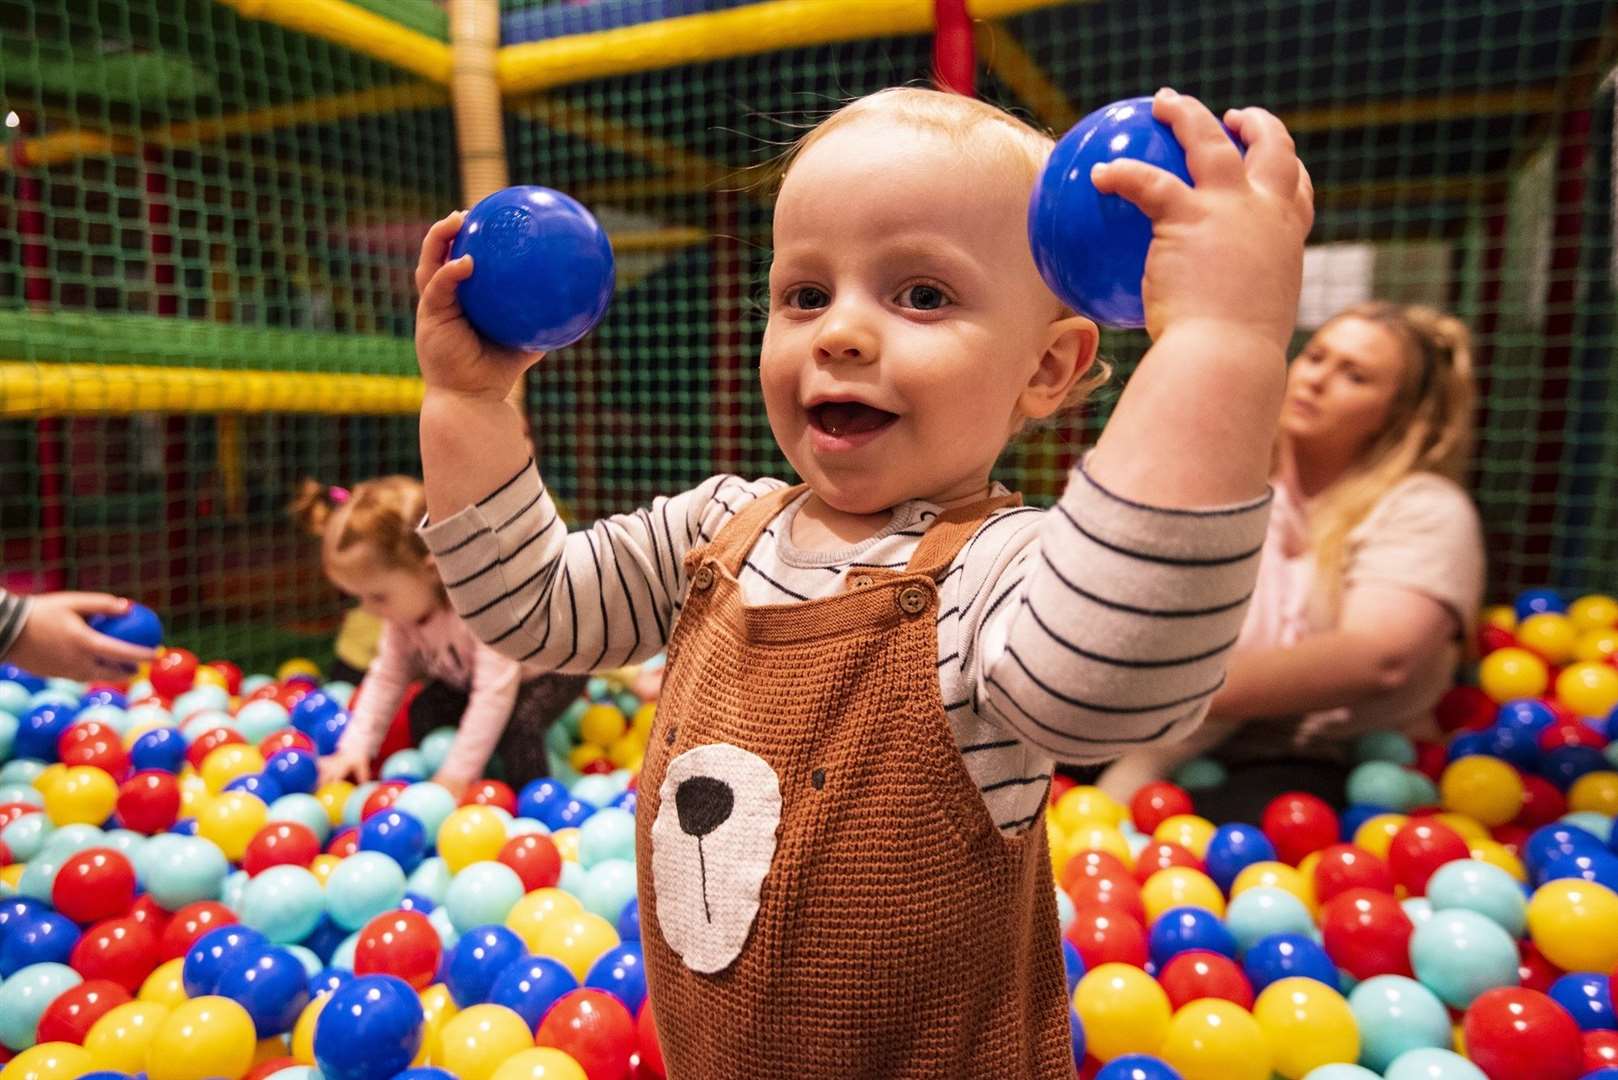 The centre of the soft play area features a ball pit